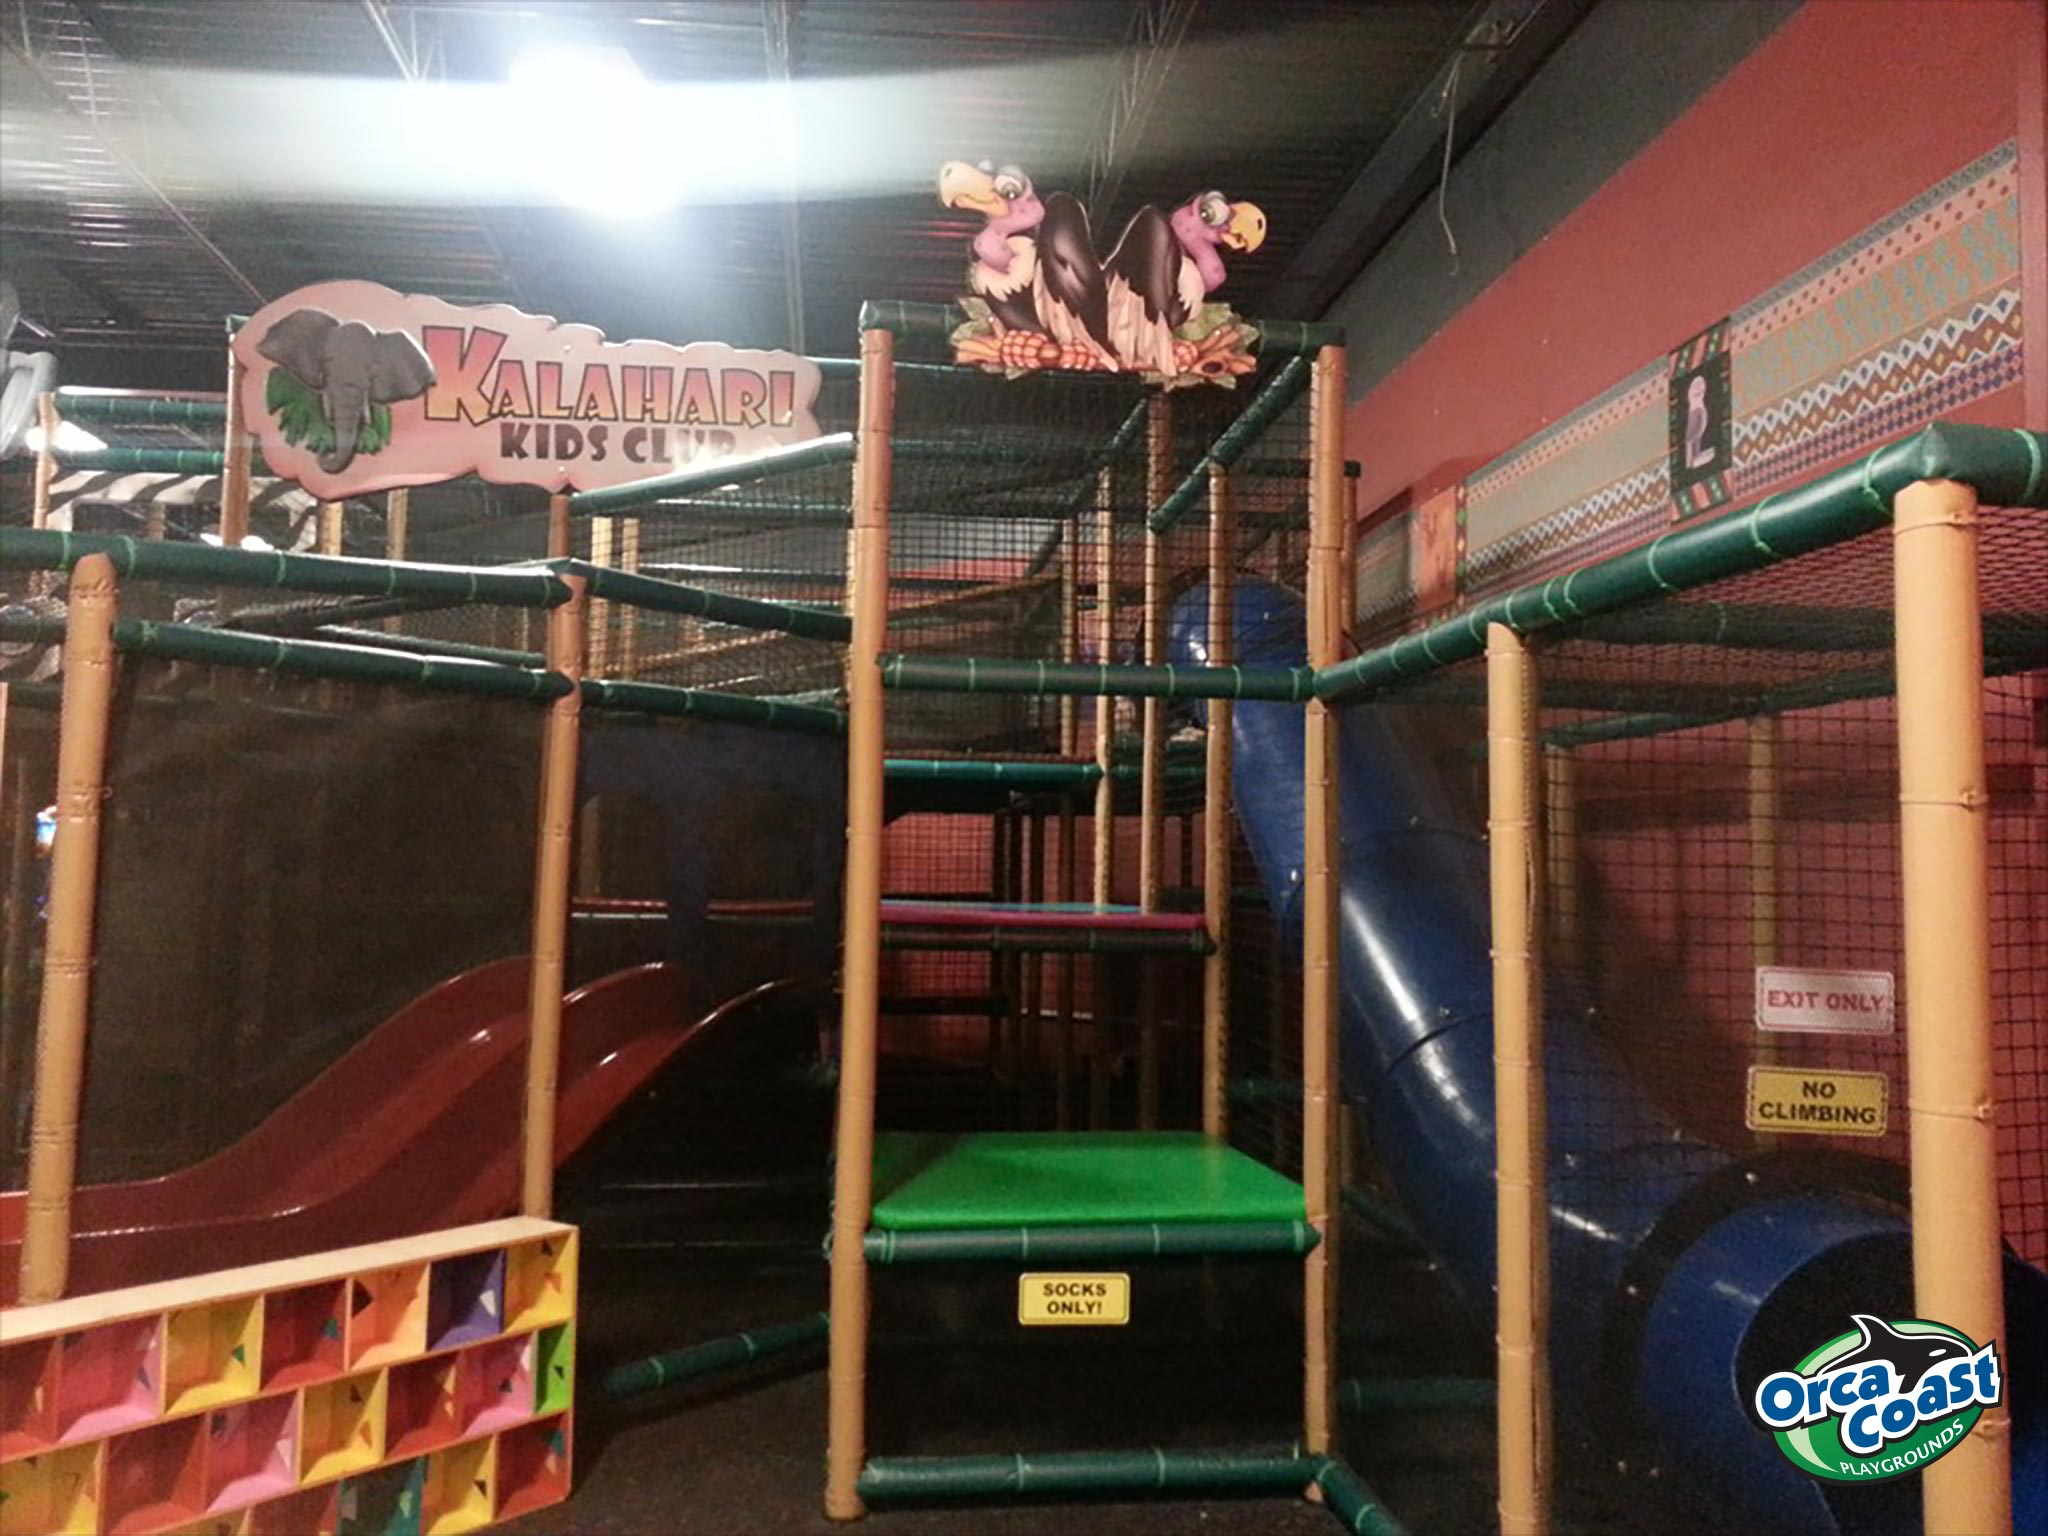 The indoor playground at Kalahari Resorts and Conventions in Wisconsin Dells, WI